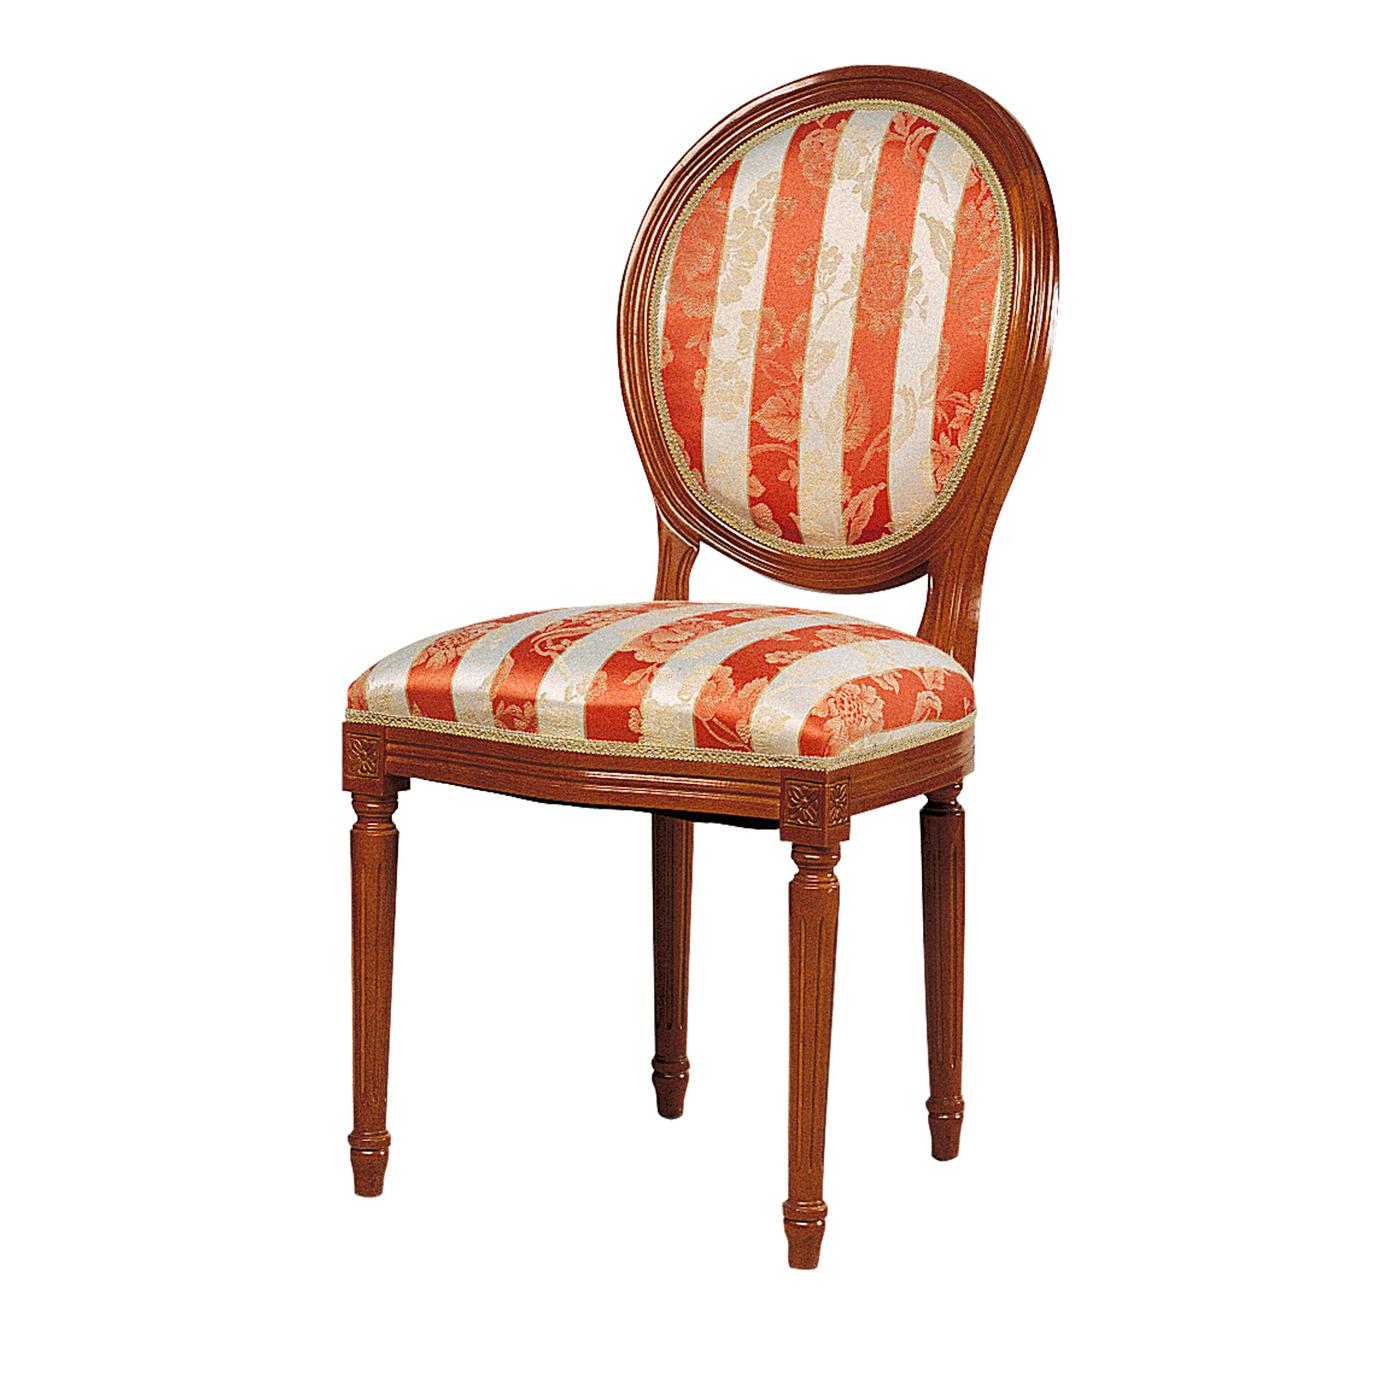 A typically Italian Baroque design for this chair that is part of the Contemporary collection. The wooden structure is offered in an antique ivory-white finish.